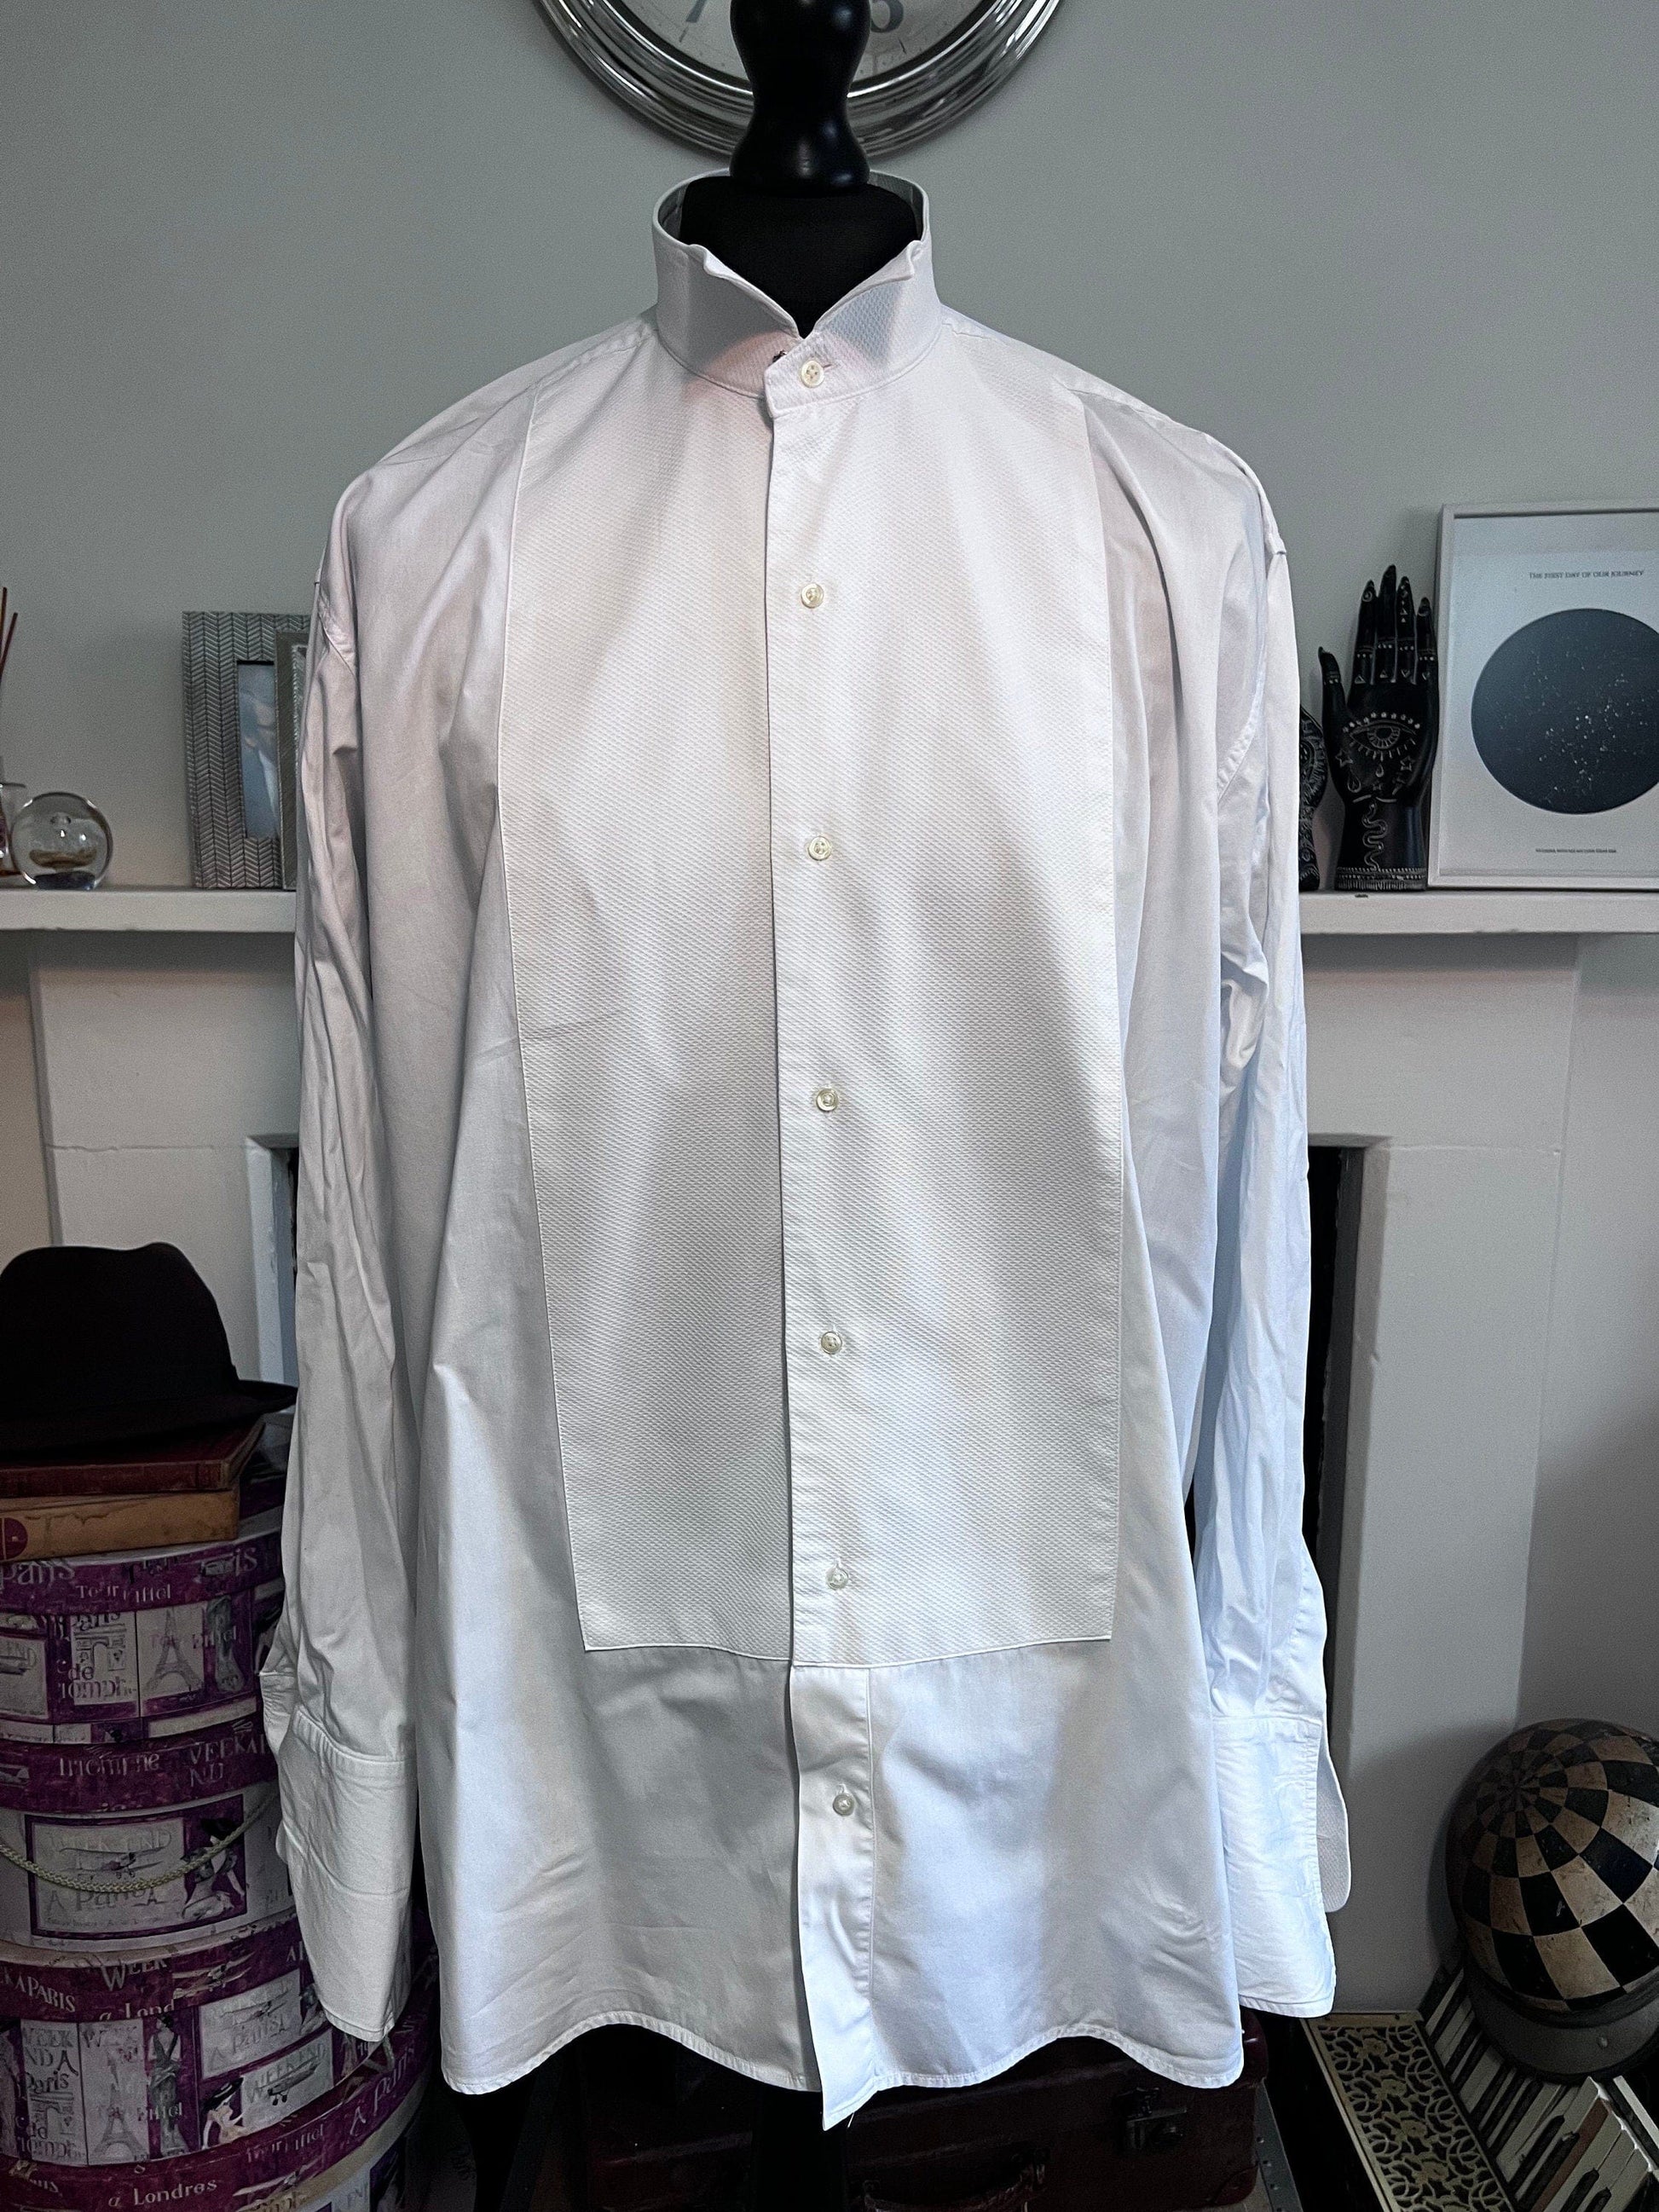 Vintage 80s does 1940s style White wing tip Shirt,  gents fress Shirt, vintage shirt, vintage shirt, mens shirt, vintage menswear, Wing Tip